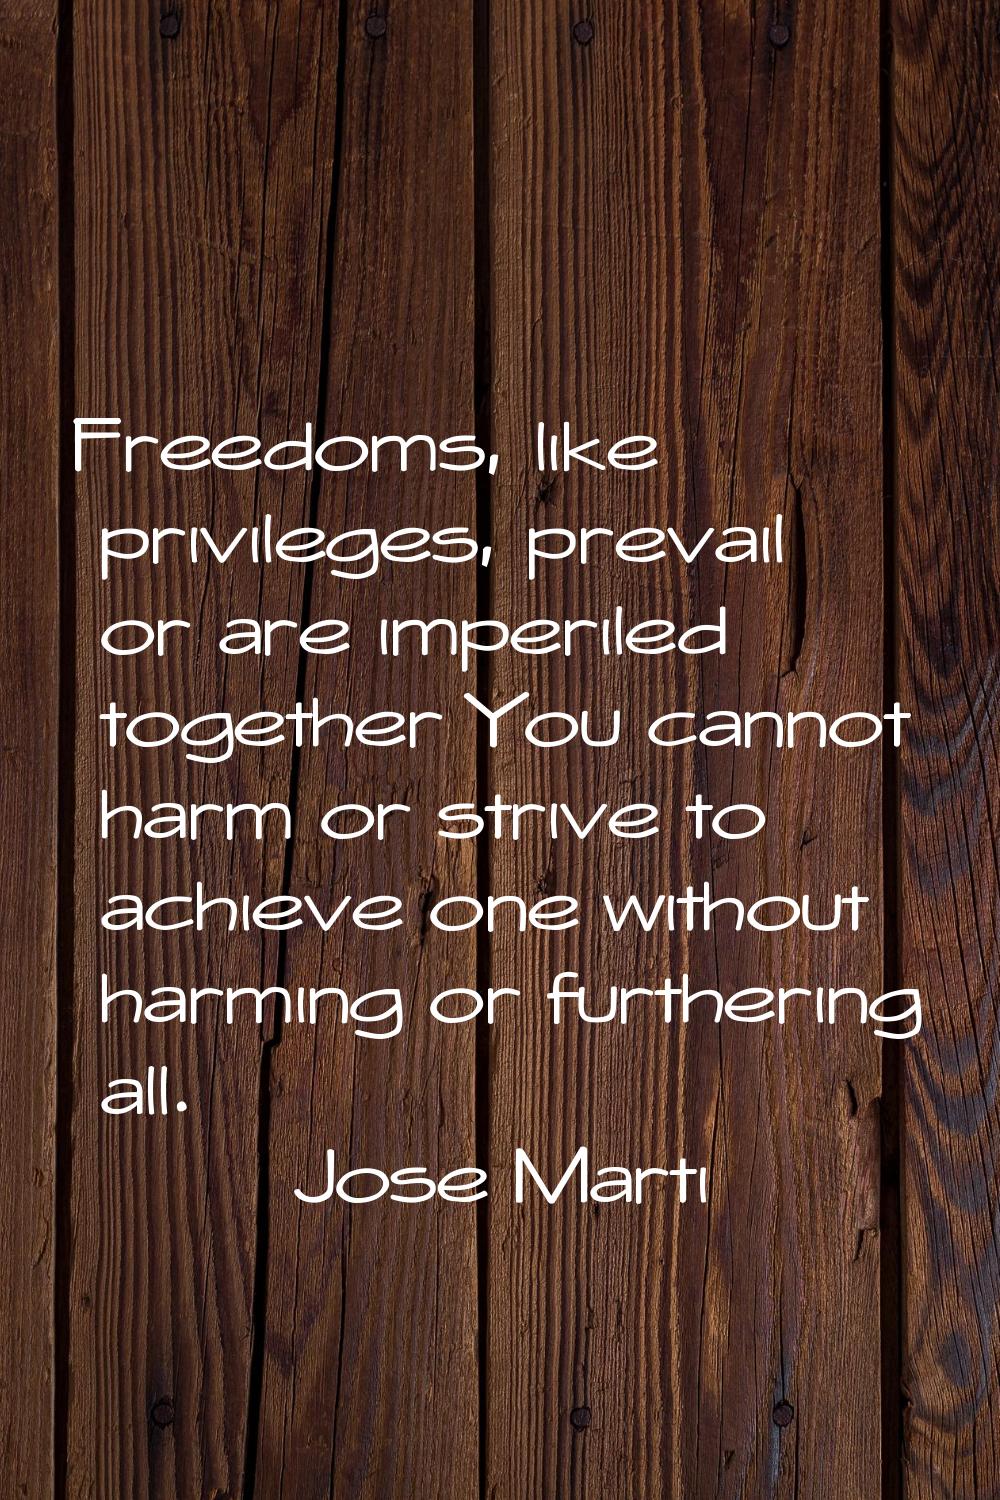 Freedoms, like privileges, prevail or are imperiled together You cannot harm or strive to achieve o